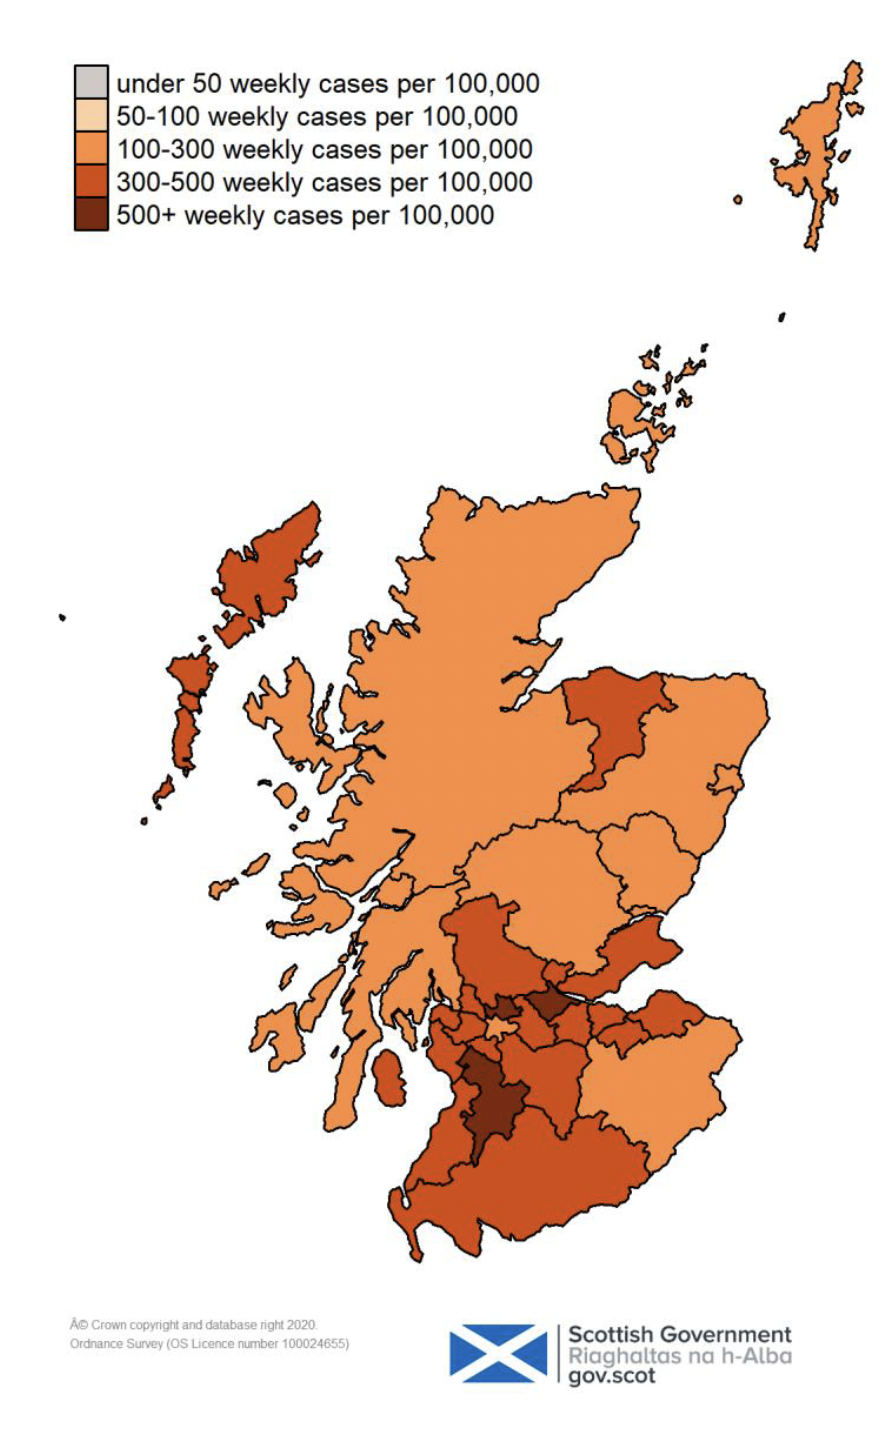 This colour coded map of Scotland shows the different rates of weekly positive cases per 100,000 people across Scotland’s Local Authorities. The colours range from grey for under 50 weekly cases per 100,000, through very light orange for 50 to 100, orange for 100-300, darker orange for 300-500, and very dark orange for over 500 weekly cases per 100,000 people. 
East Ayrshire, East Dunbartonshire and Falkirk are showing as very dark orange on the map this week, with over 500 weekly cases per 100,000. City of Edinburgh, Clackmannanshire, Dumfries and Galloway, East Lothian, East Renfrewshire, Fife, Inverclyde, Midlothian, Moray, Na h-Eileanan Siar, North Ayrshire, North Lanarkshire, Renfrewshire, South Ayrshire, South Lanarkshire, Stirling, West Dunbartonshire and West Lothian are shown as darker orange with 300-500 weekly cases per 100,000. All other local authorities are showing as orange with 100-300 weekly cases per 100,000 population. No local authorities are shown as very light orange, with 50-100 weekly cases per 100,000 people, and no local authorities are showing as grey for under 50 weekly cases per 100,000.
